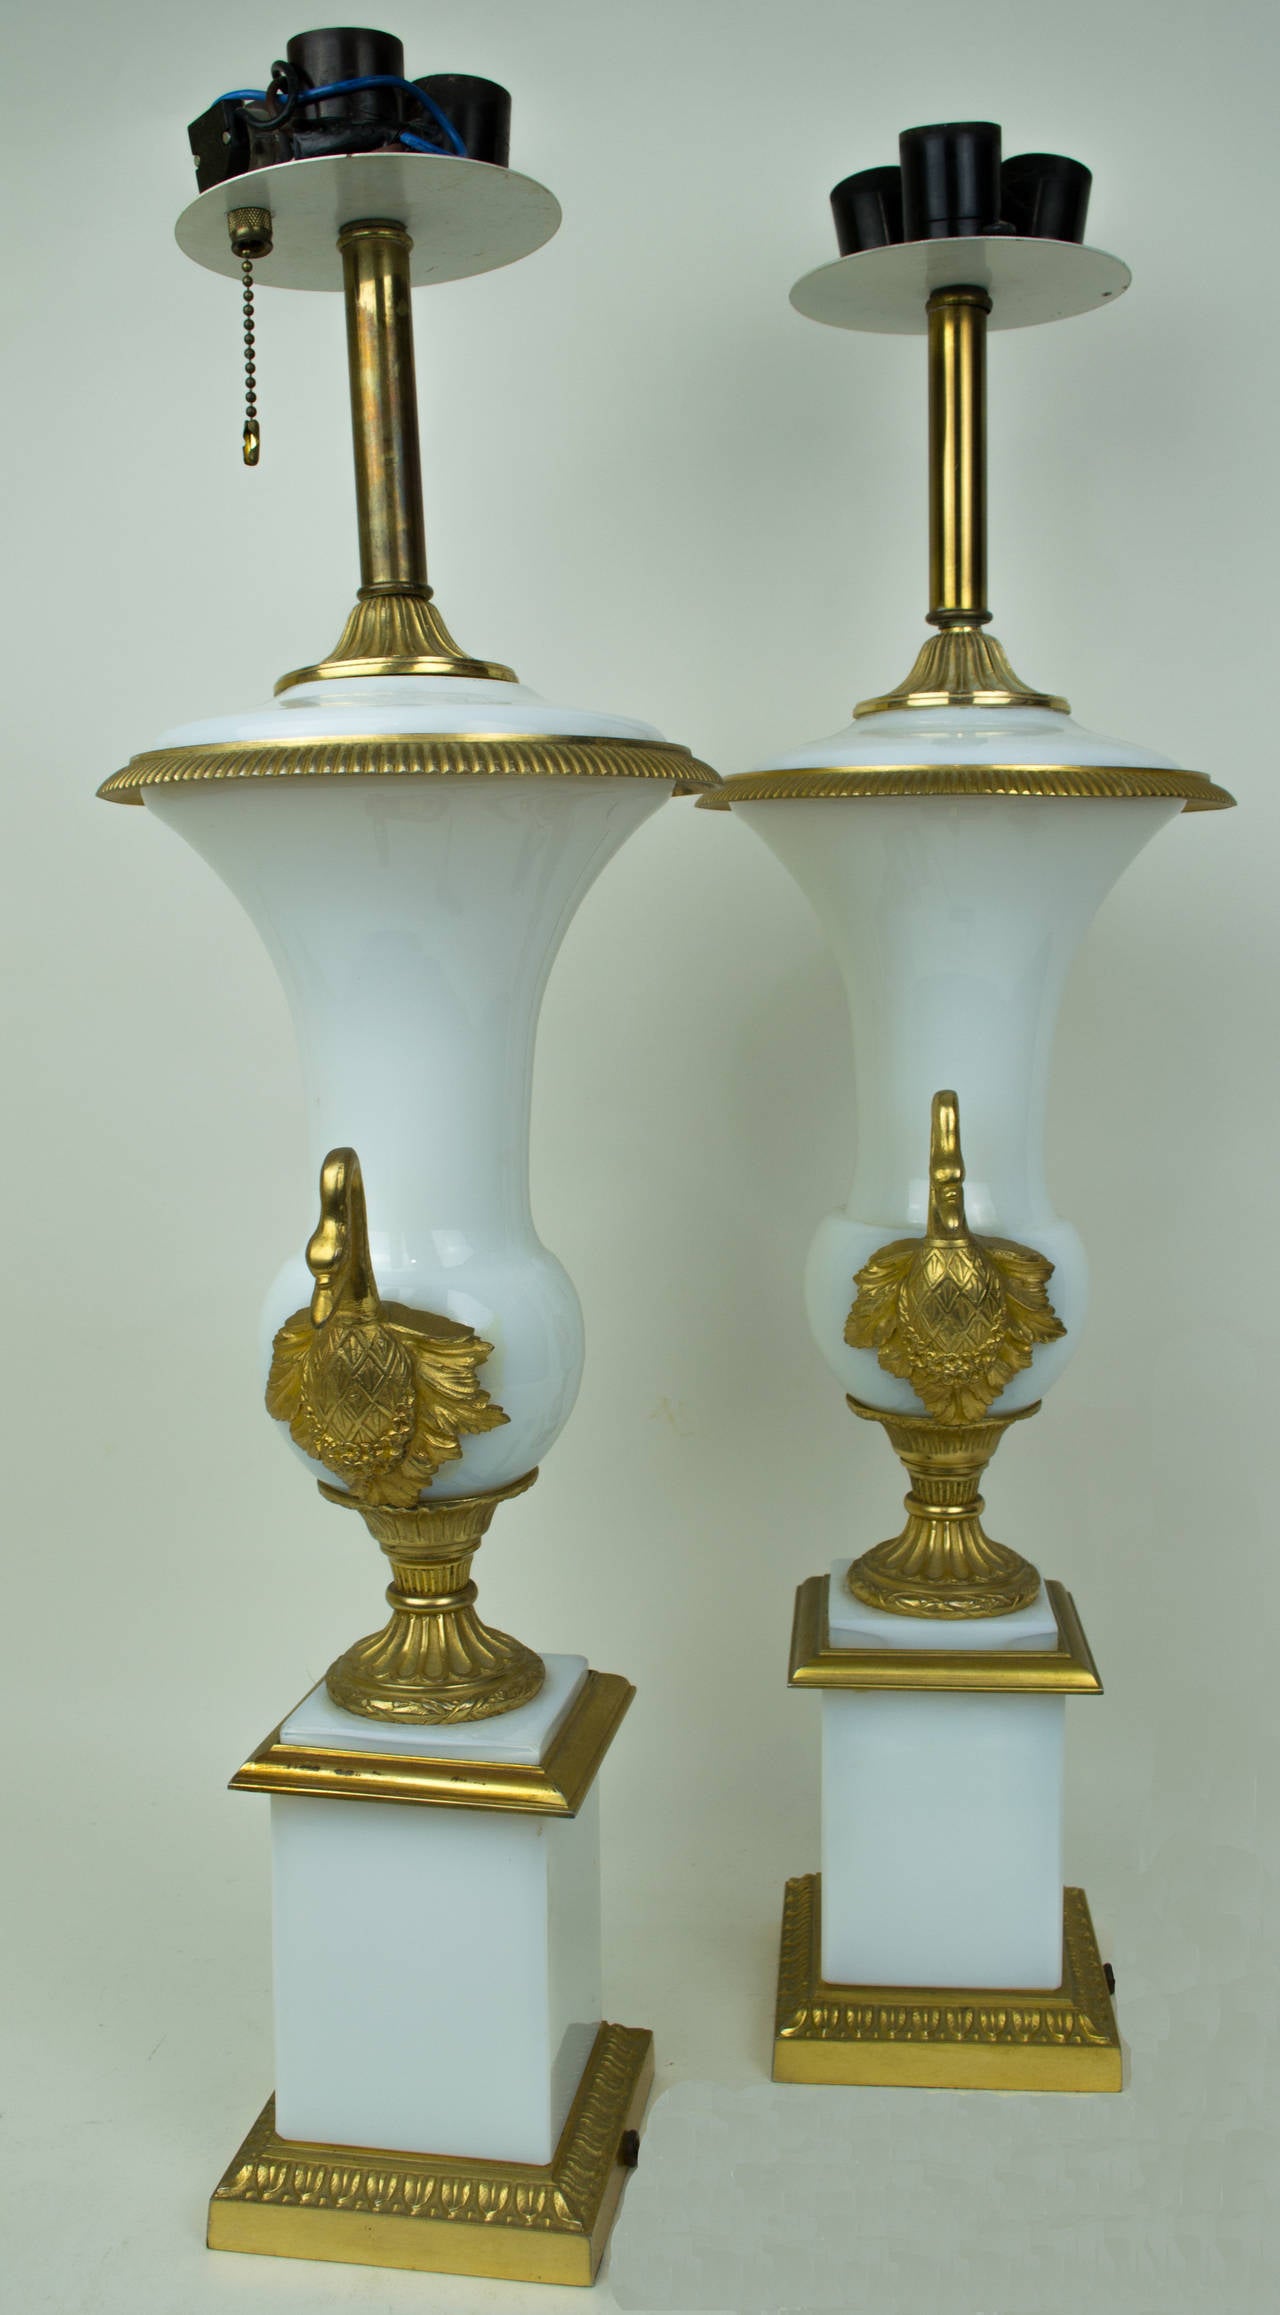 Pair of White Opaline and Bronze Neoclassical Lamps with Swan Handles
Stock Number: DA98